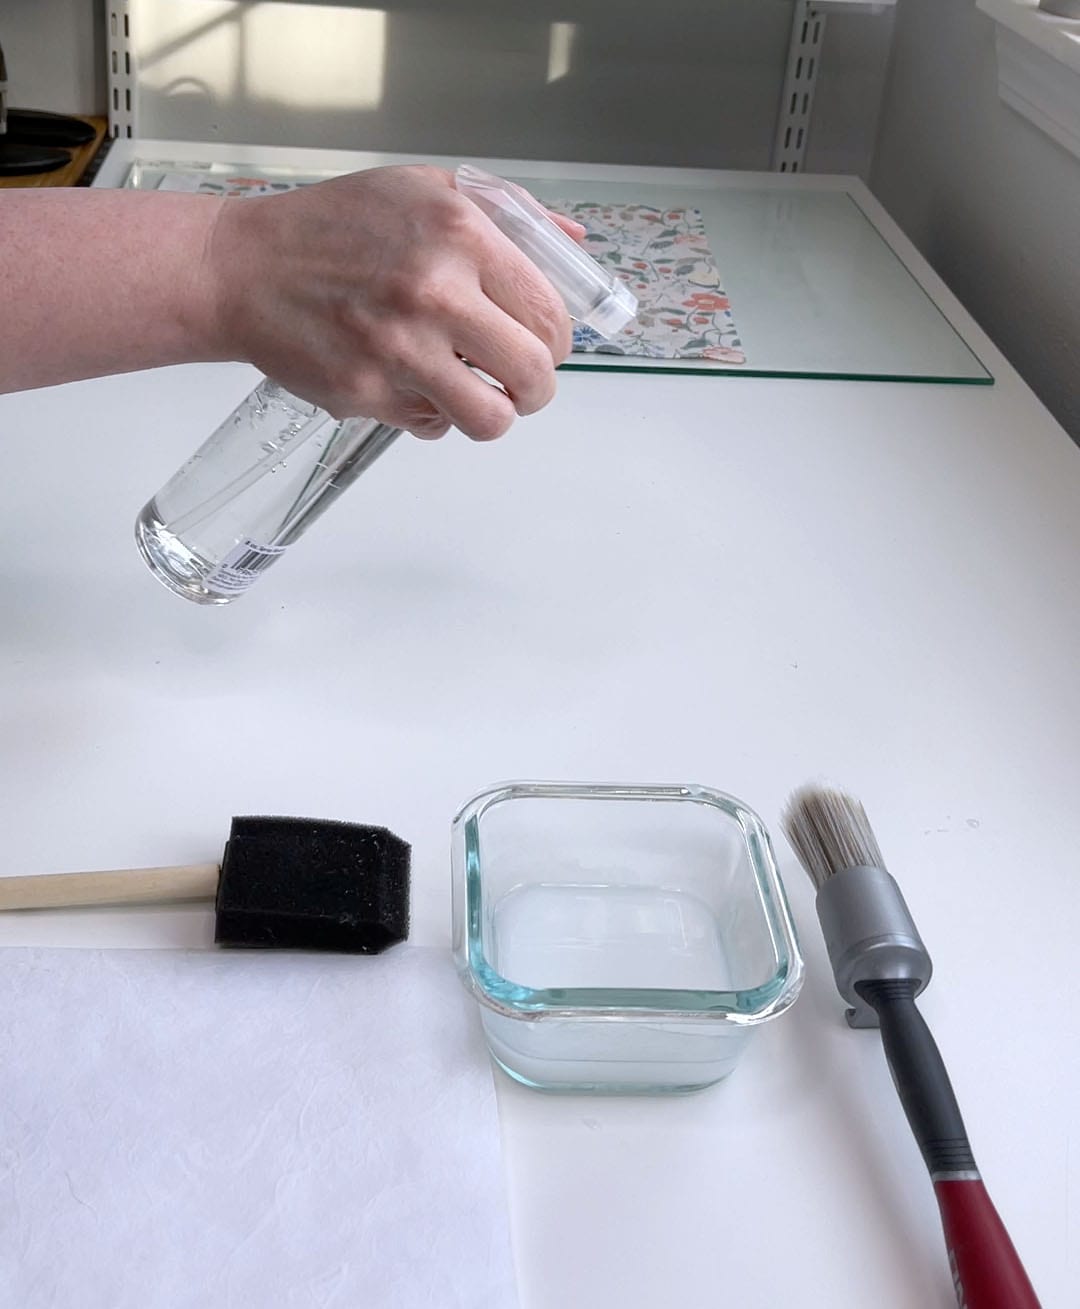 spray the table next to the glass sheet